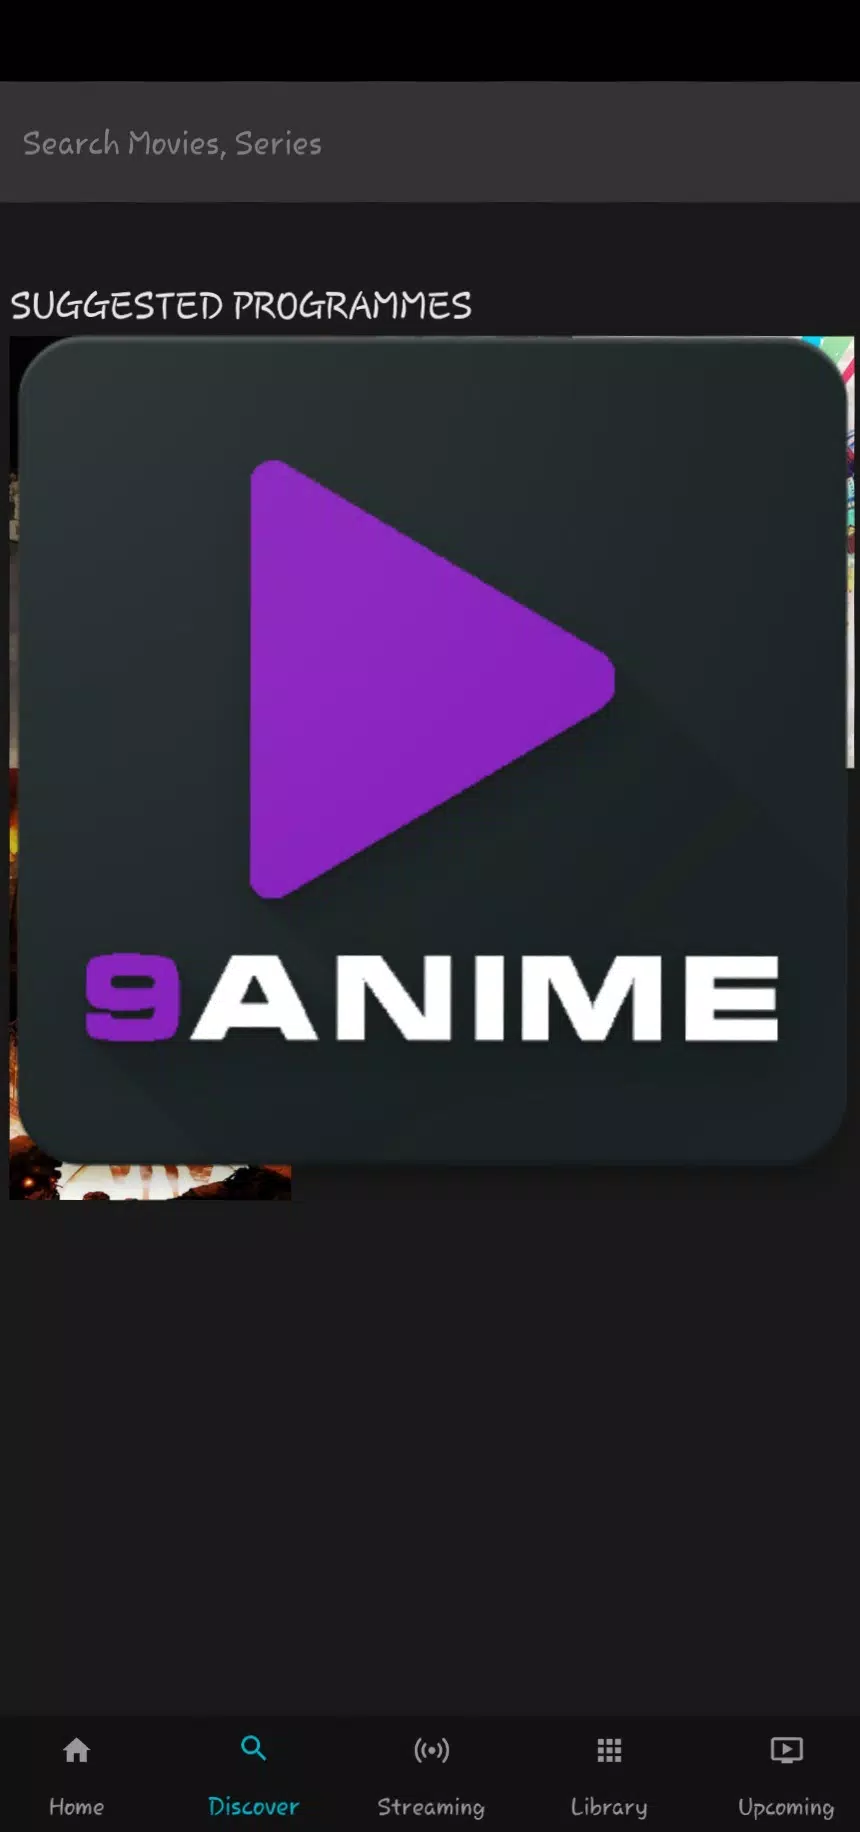 9anime - Watch & Stream Anime APK (Android App) - Free Download